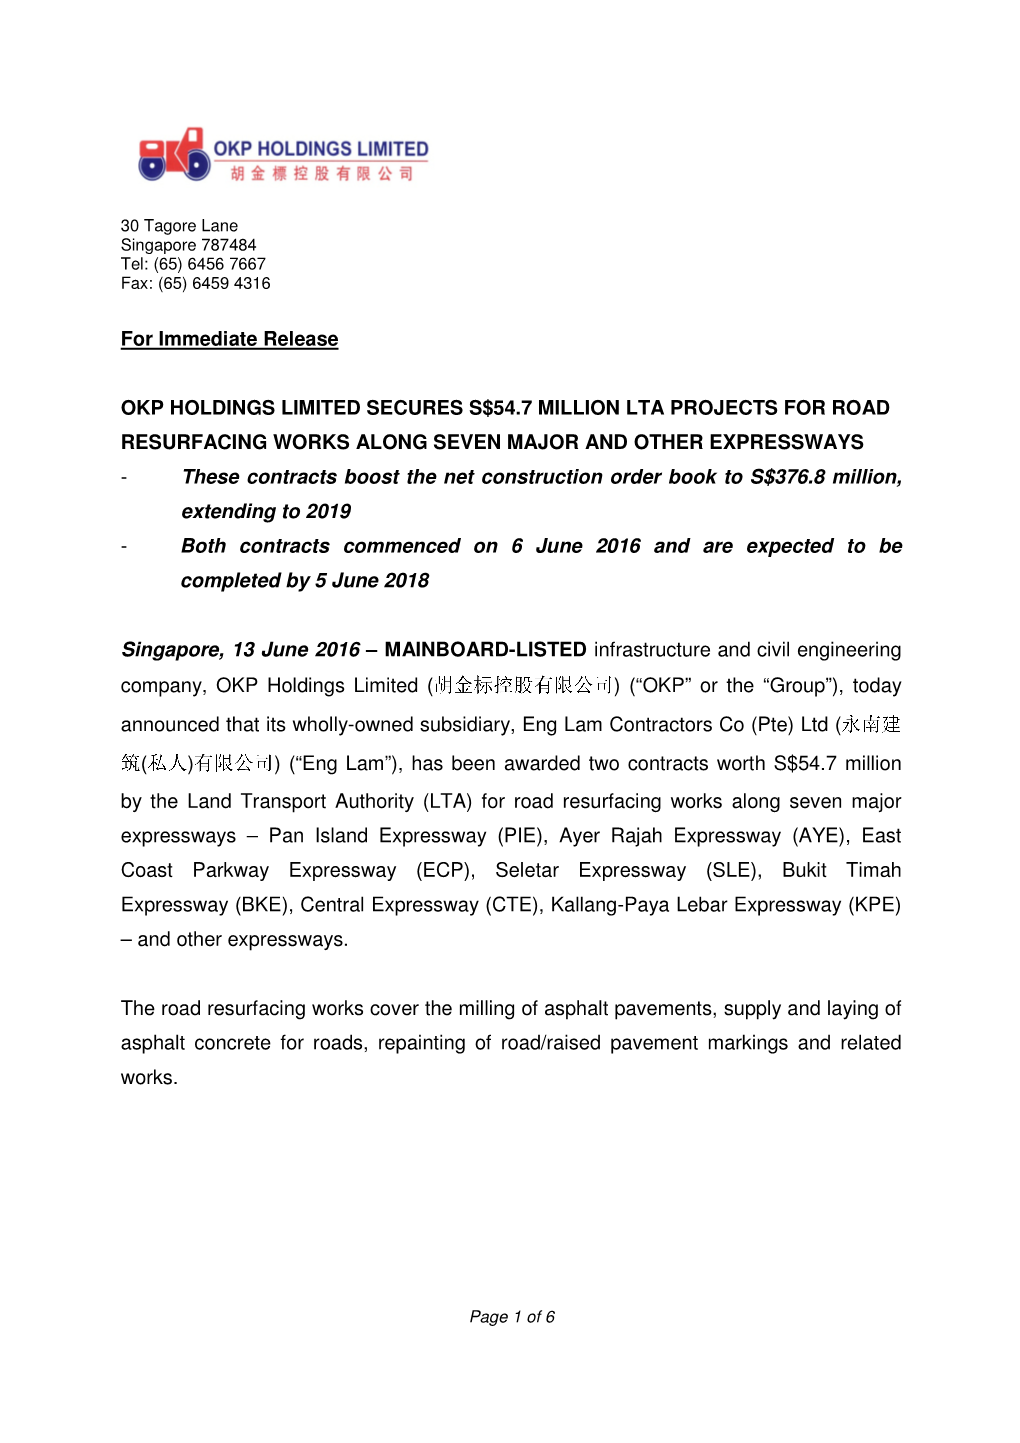 For Immediate Release OKP HOLDINGS LIMITED SECURES S$54.7 MILLION LTA PROJECTS for ROAD RESURFACING WORKS ALONG SEVEN MAJOR AN